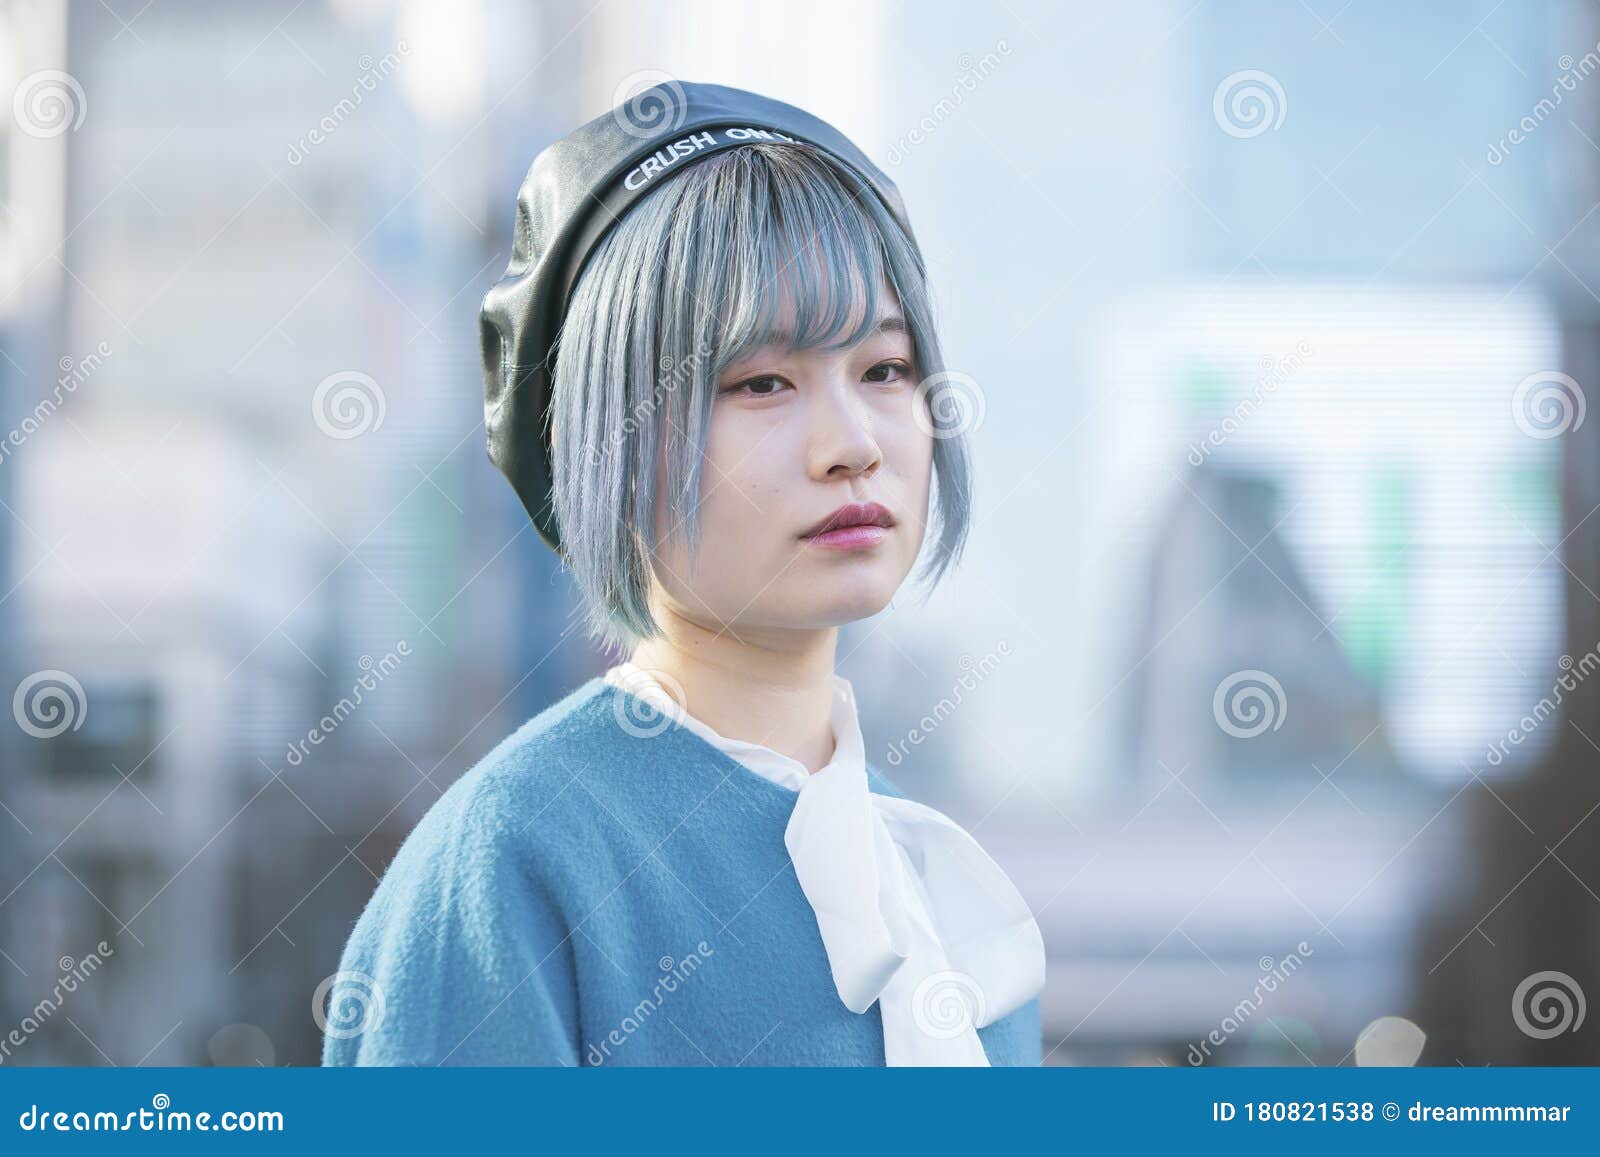 8. "Blue Hair Asian Street Style" by @asianstreetstyle - wide 8